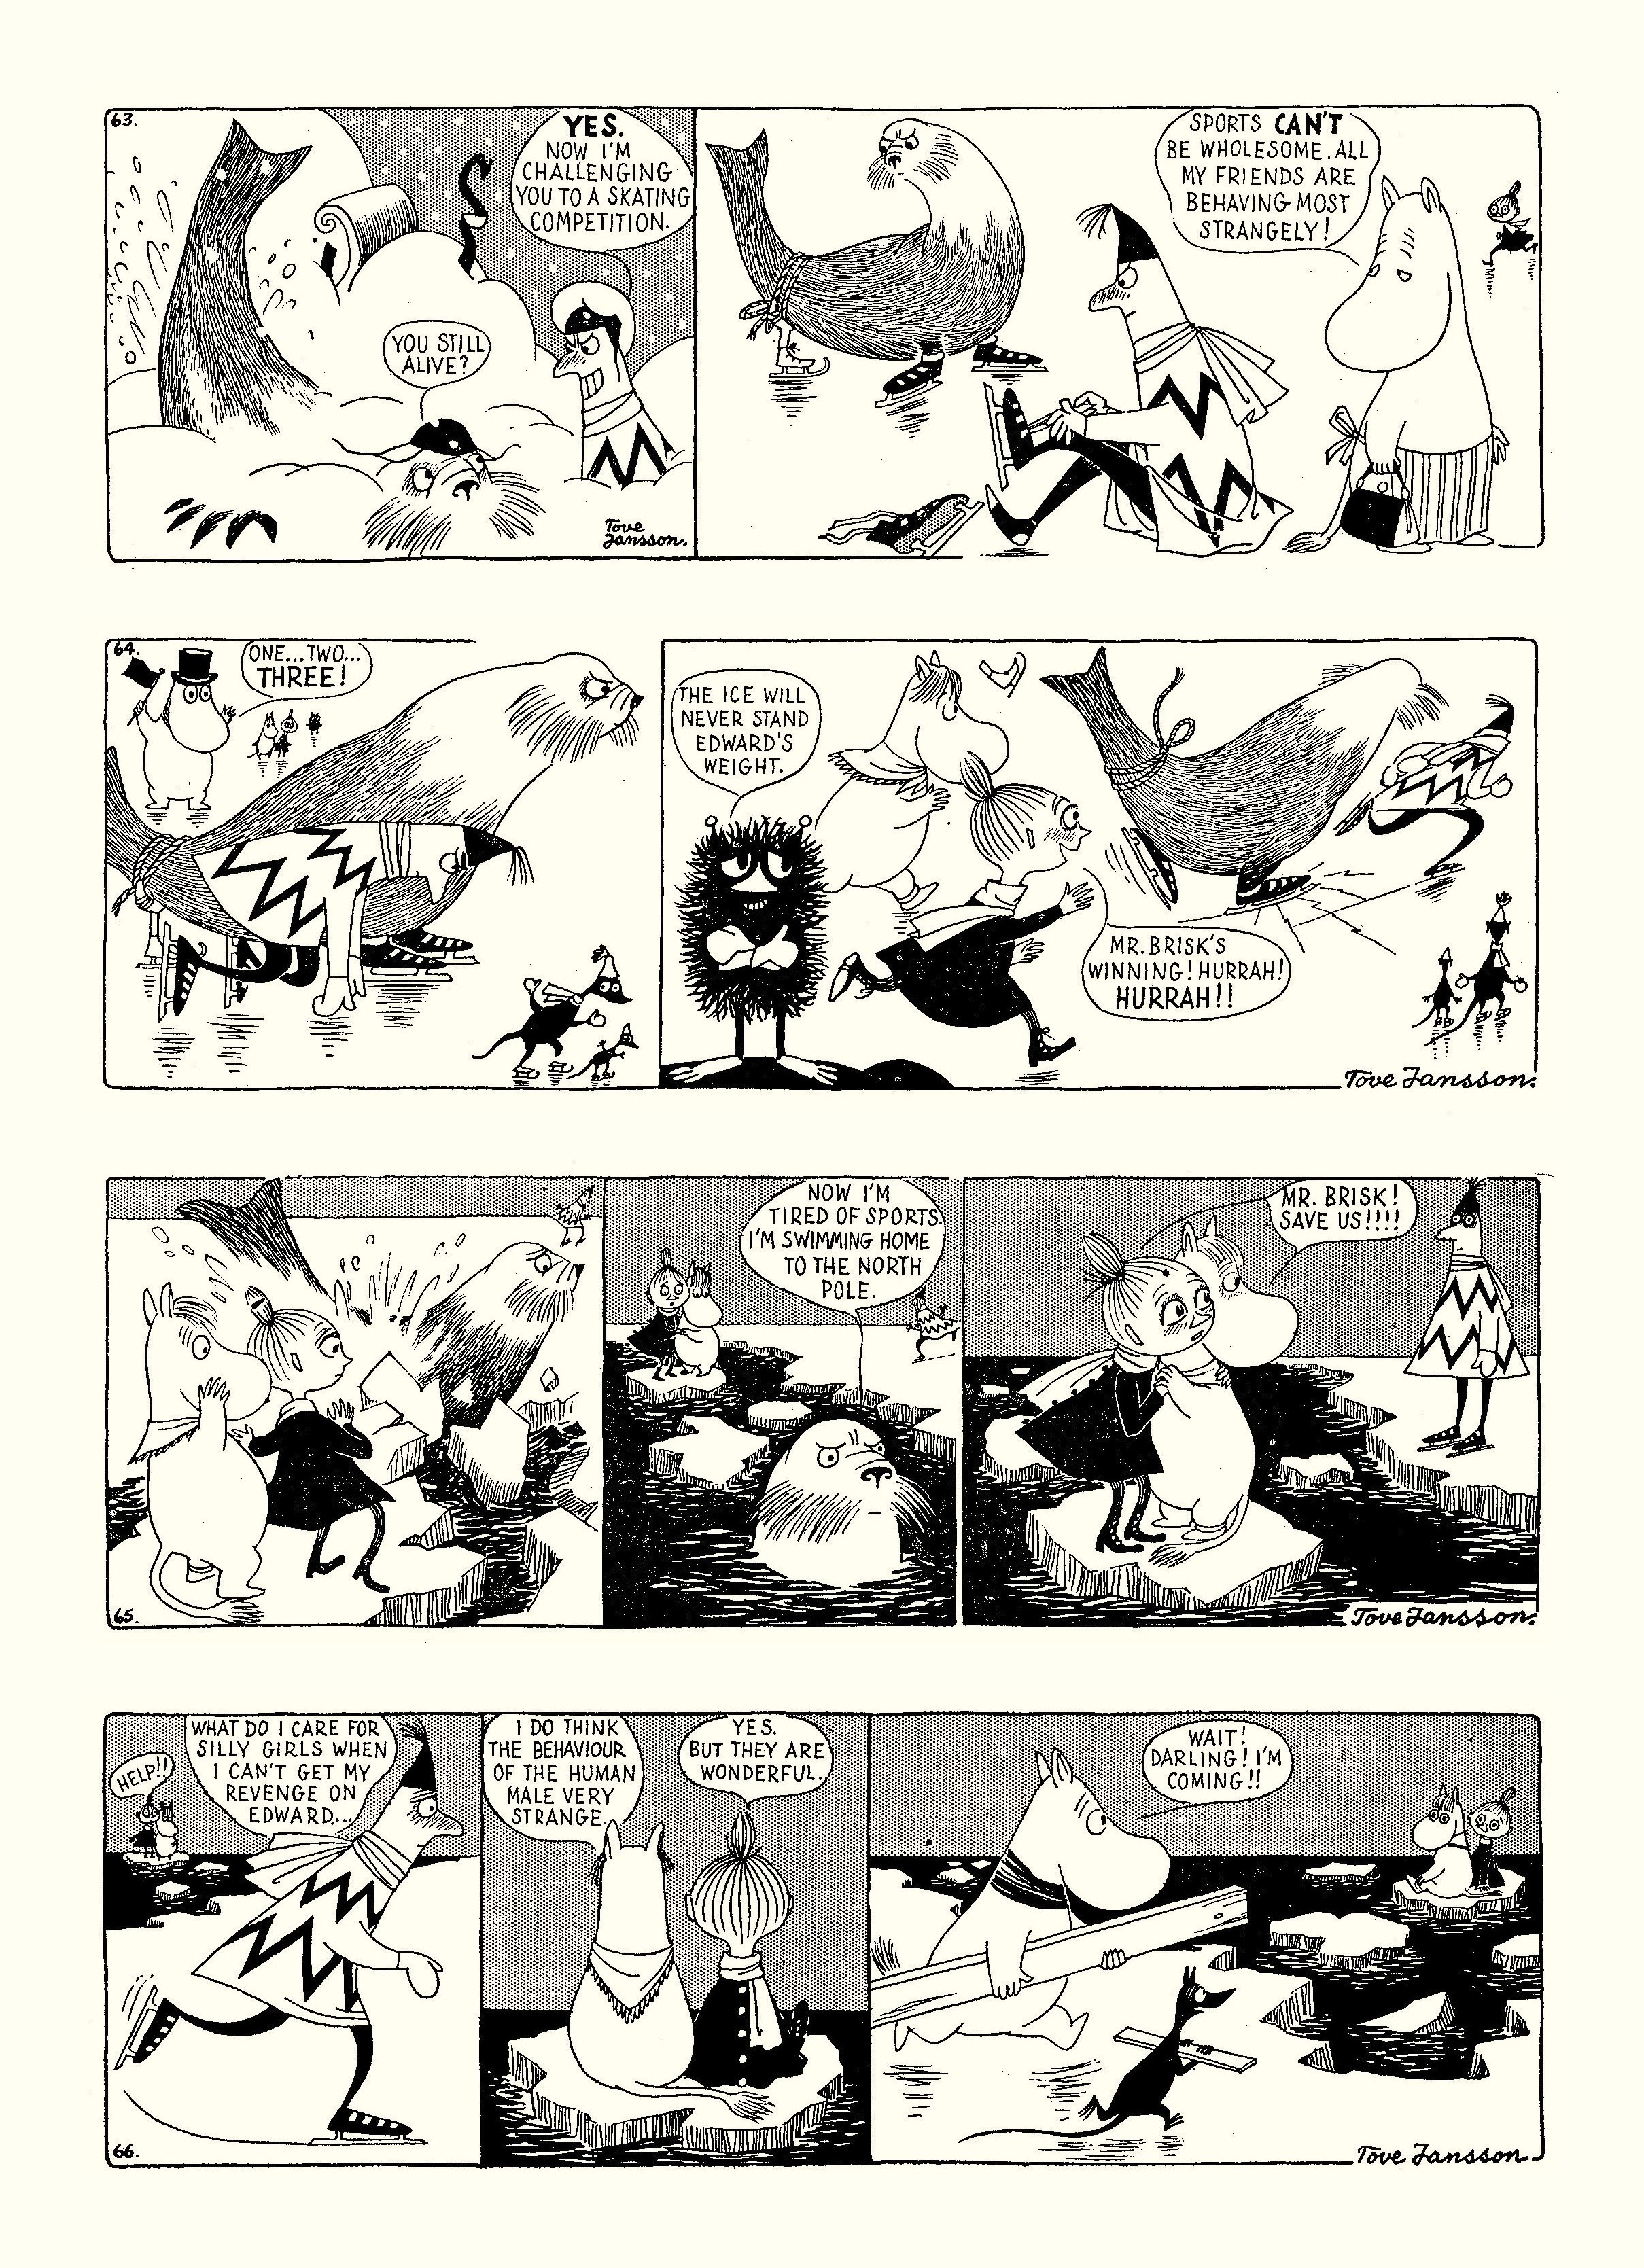 Read online Moomin: The Complete Tove Jansson Comic Strip comic -  Issue # TPB 2 - 22